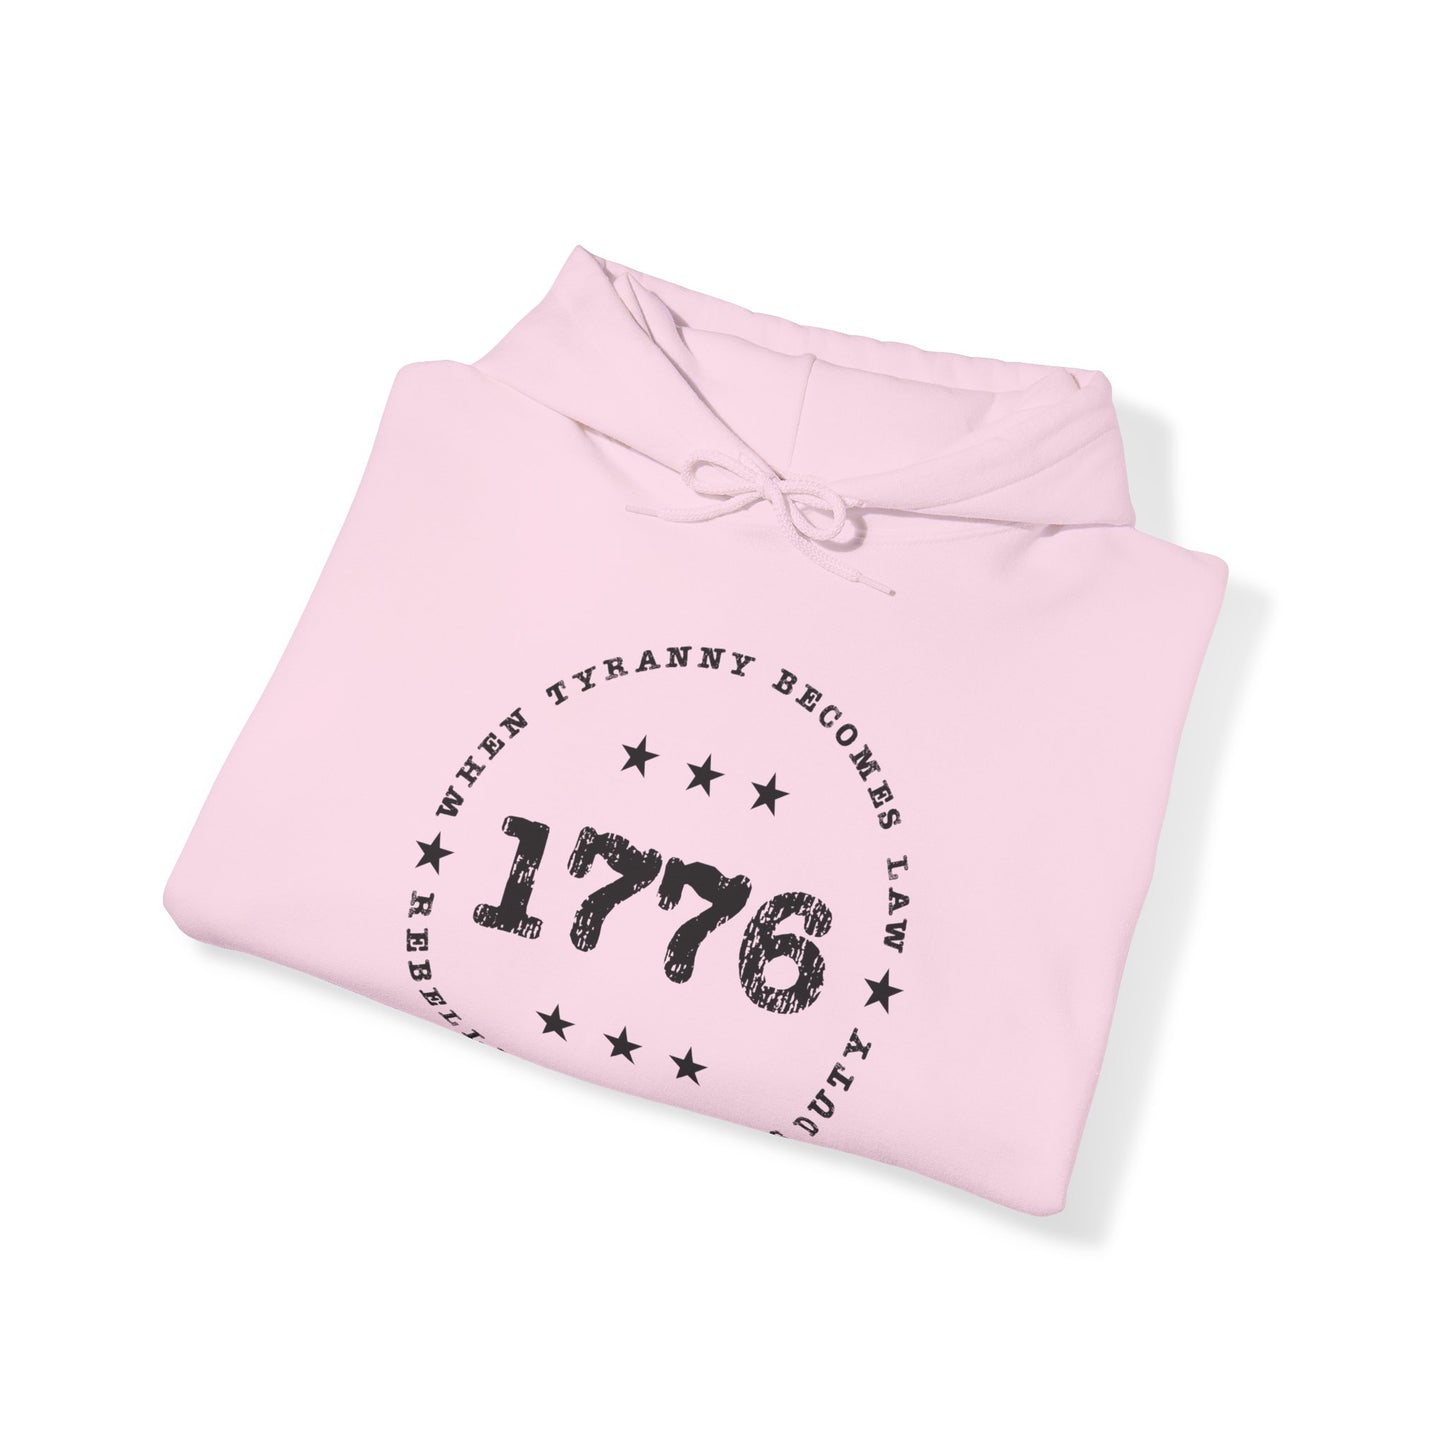 1776 Hooded Sweatshirt For Tyranny Hoodie For Rebellion Clothing For Conservative Gift